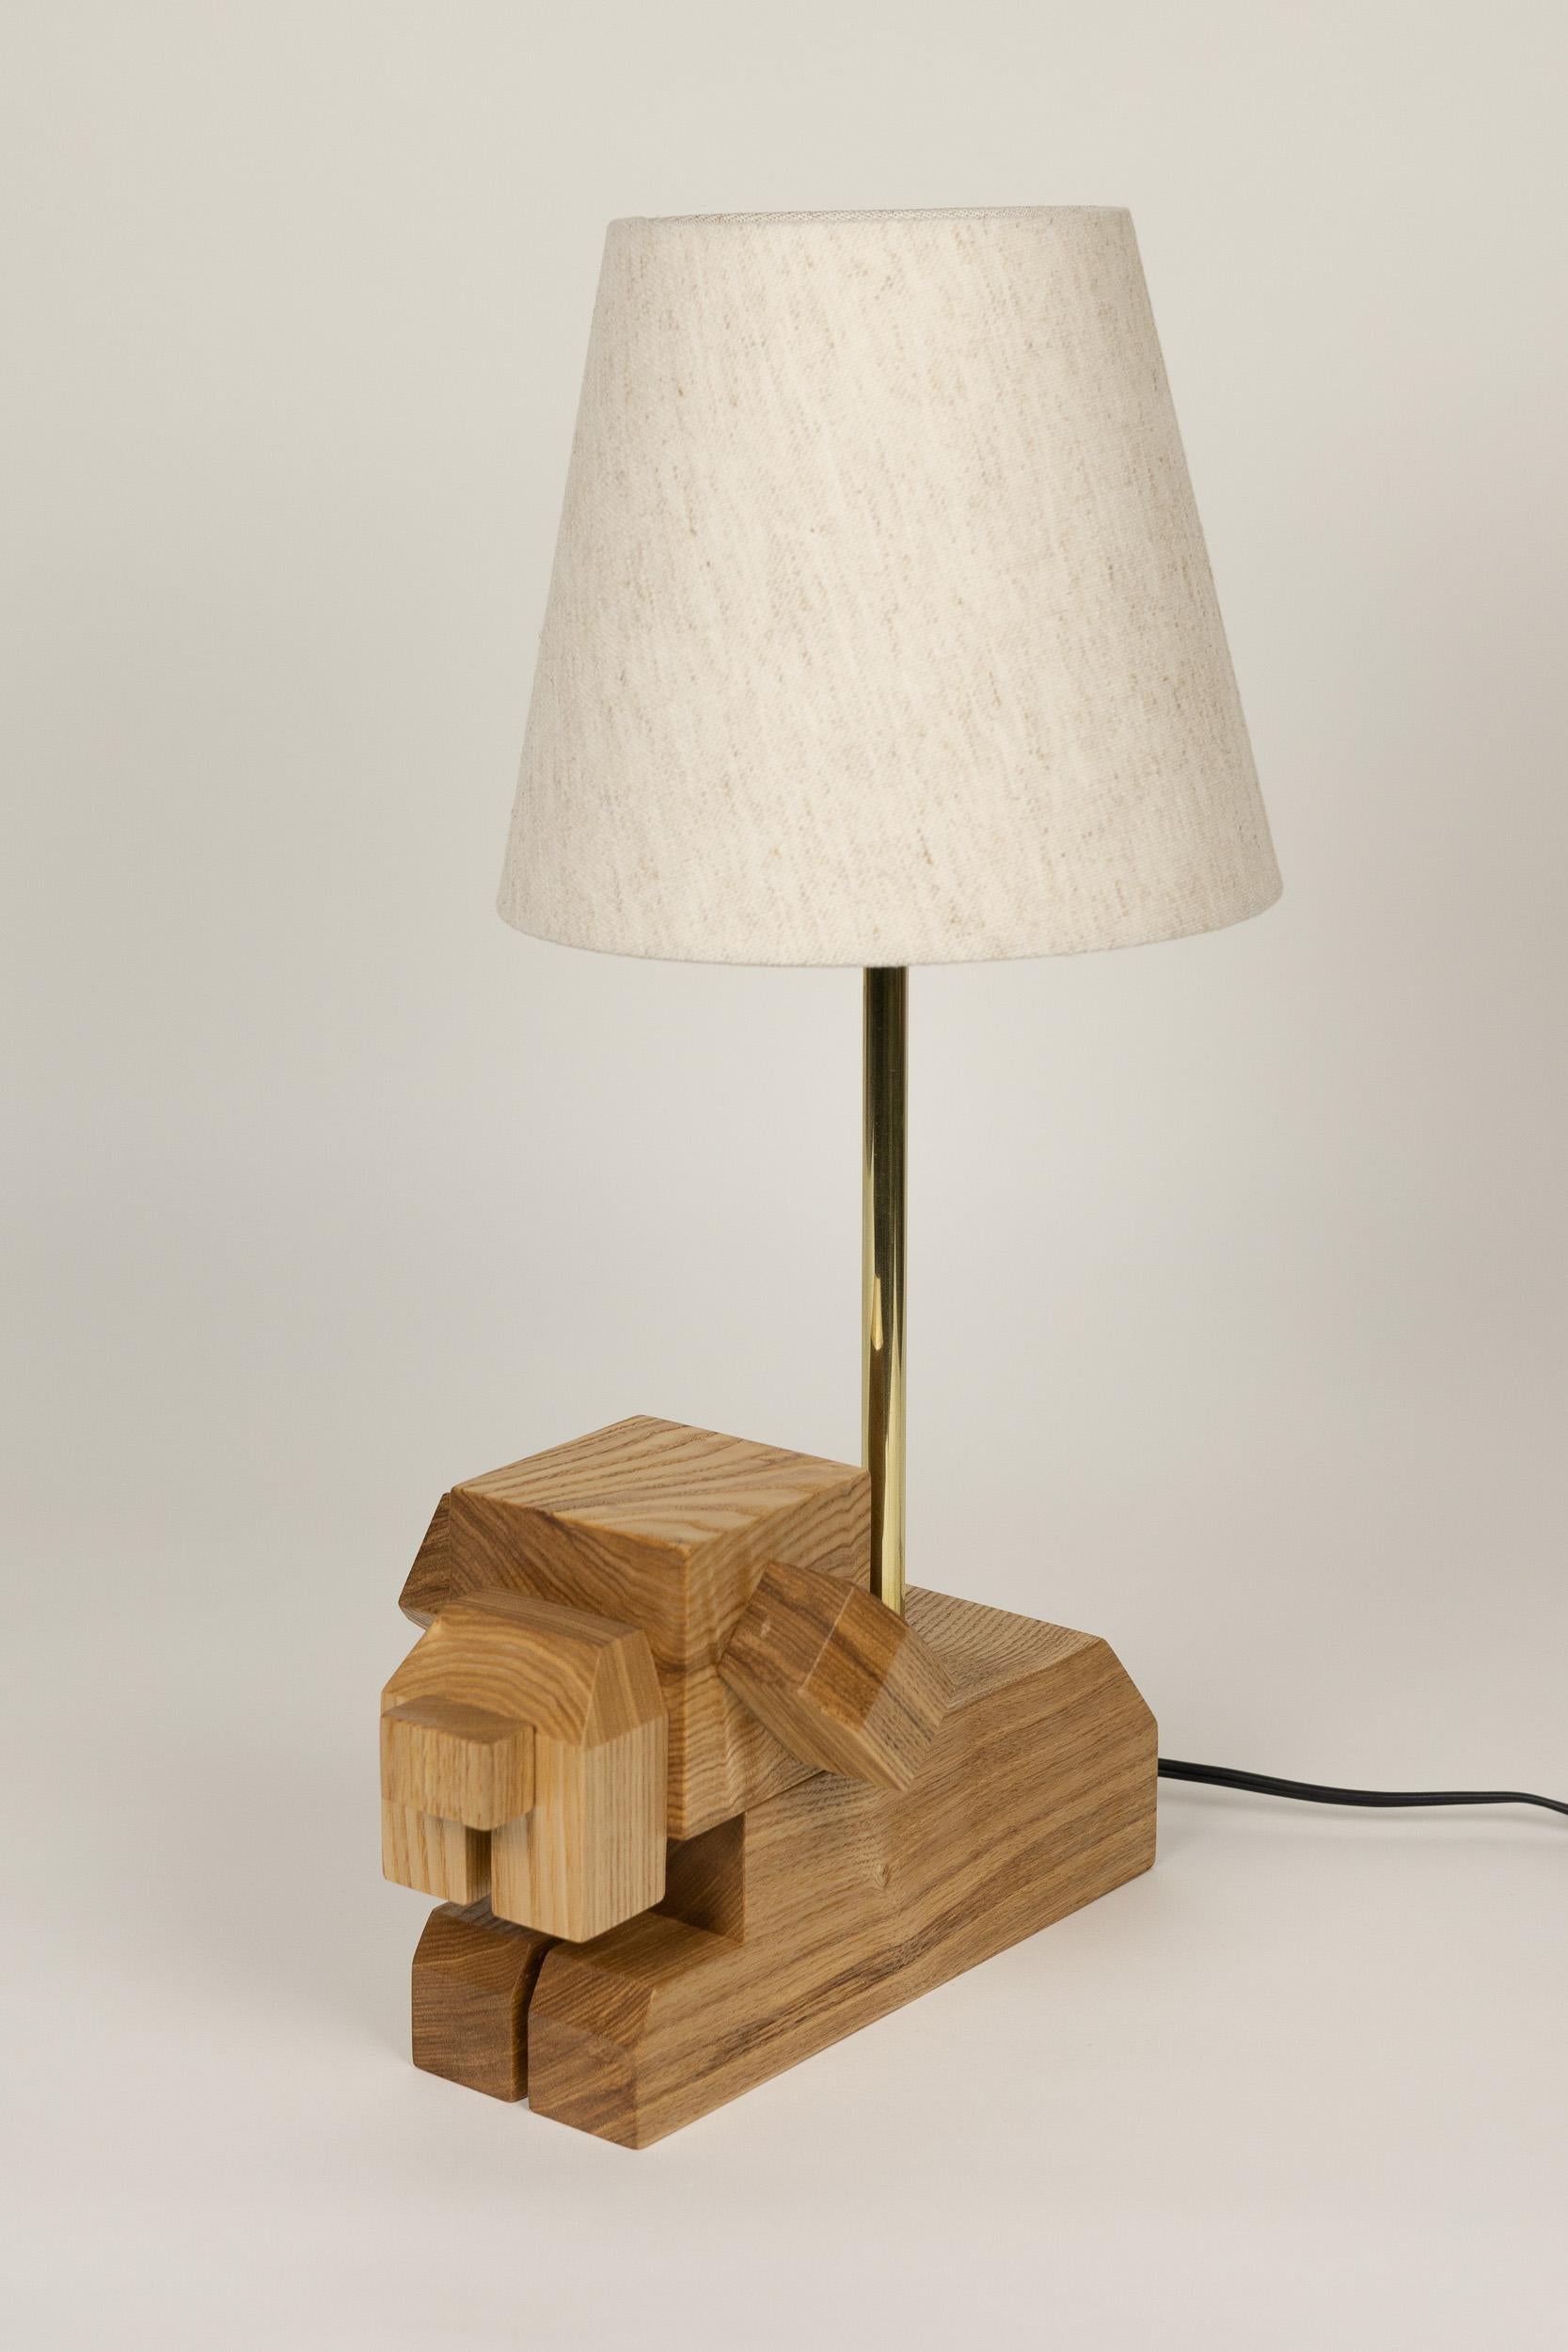 In-stock, Doggy Wooden Table Lamp by WANWANWONDERLAND, hardwood, fabric shade  In New Condition For Sale In Brooklyn, NY